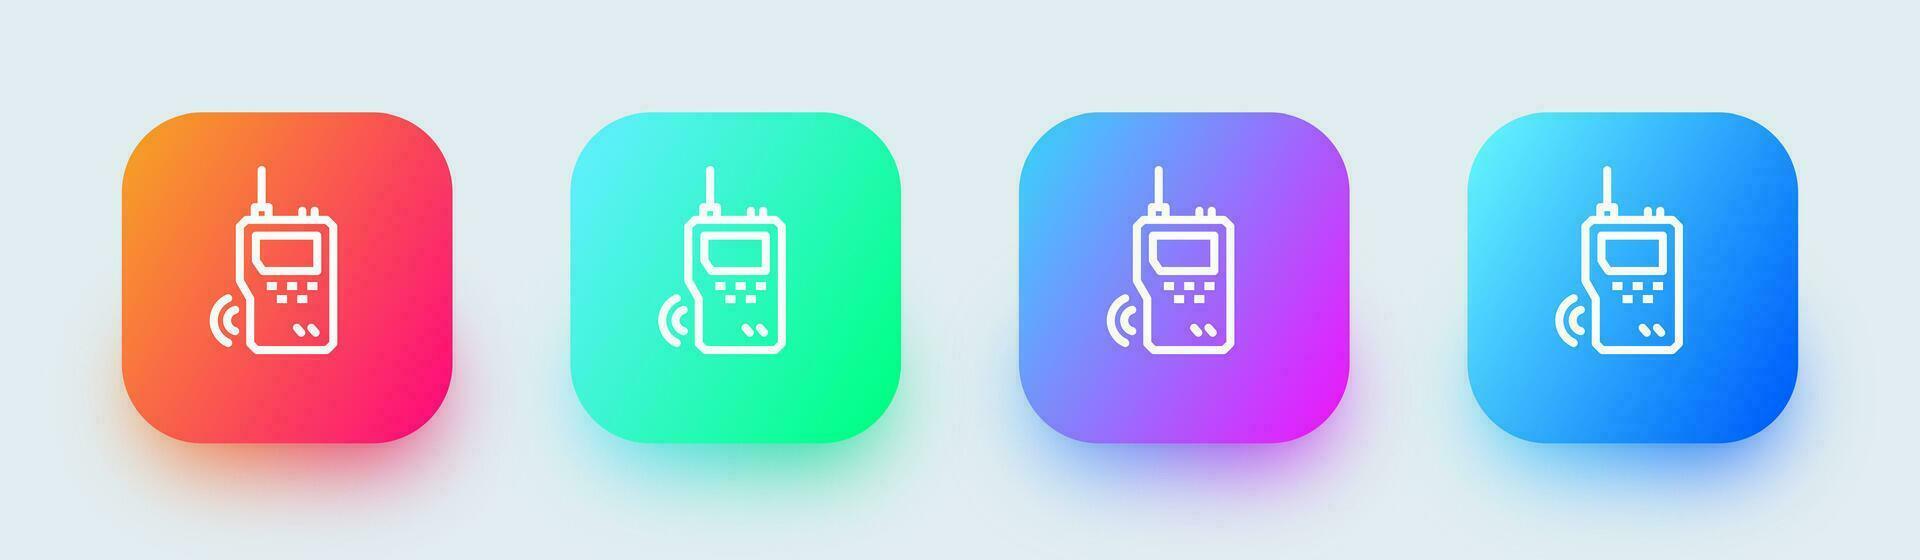 Old phone line icon in square gradient colors. vector